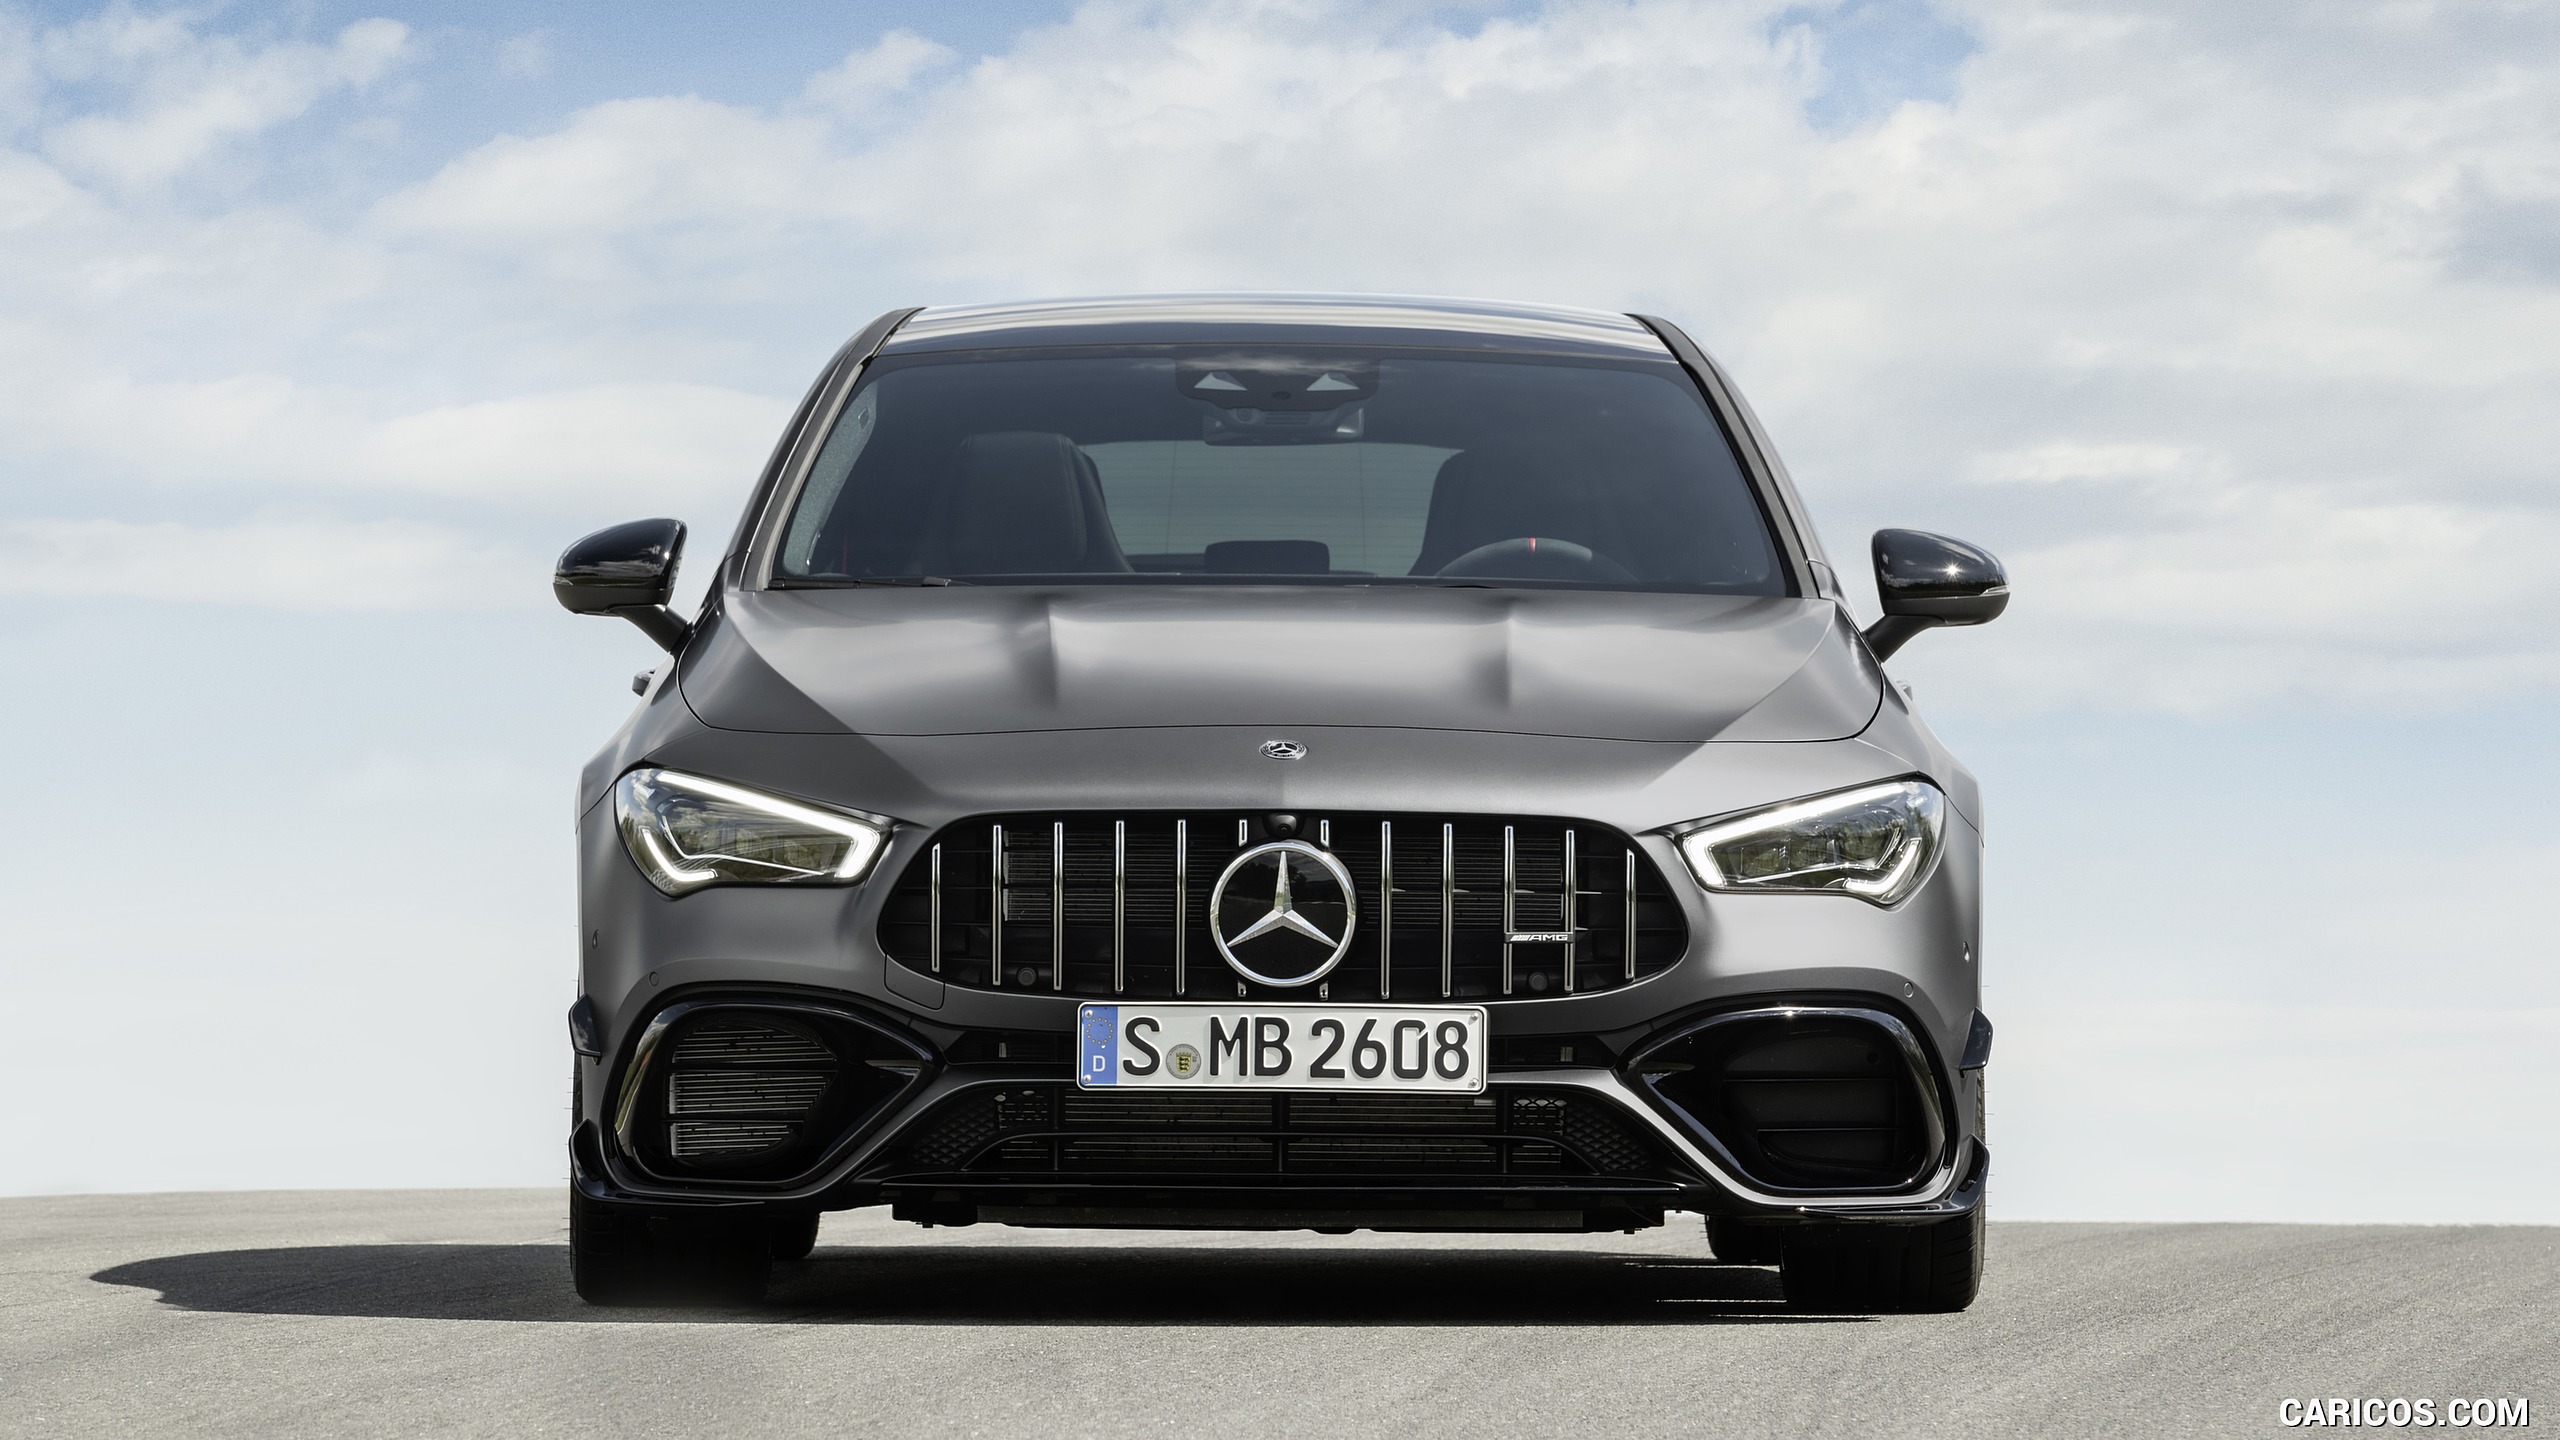 2020 Mercedes-AMG CLA 45 S 4MATIC+ Shooting Brake - Front, #20 of 35